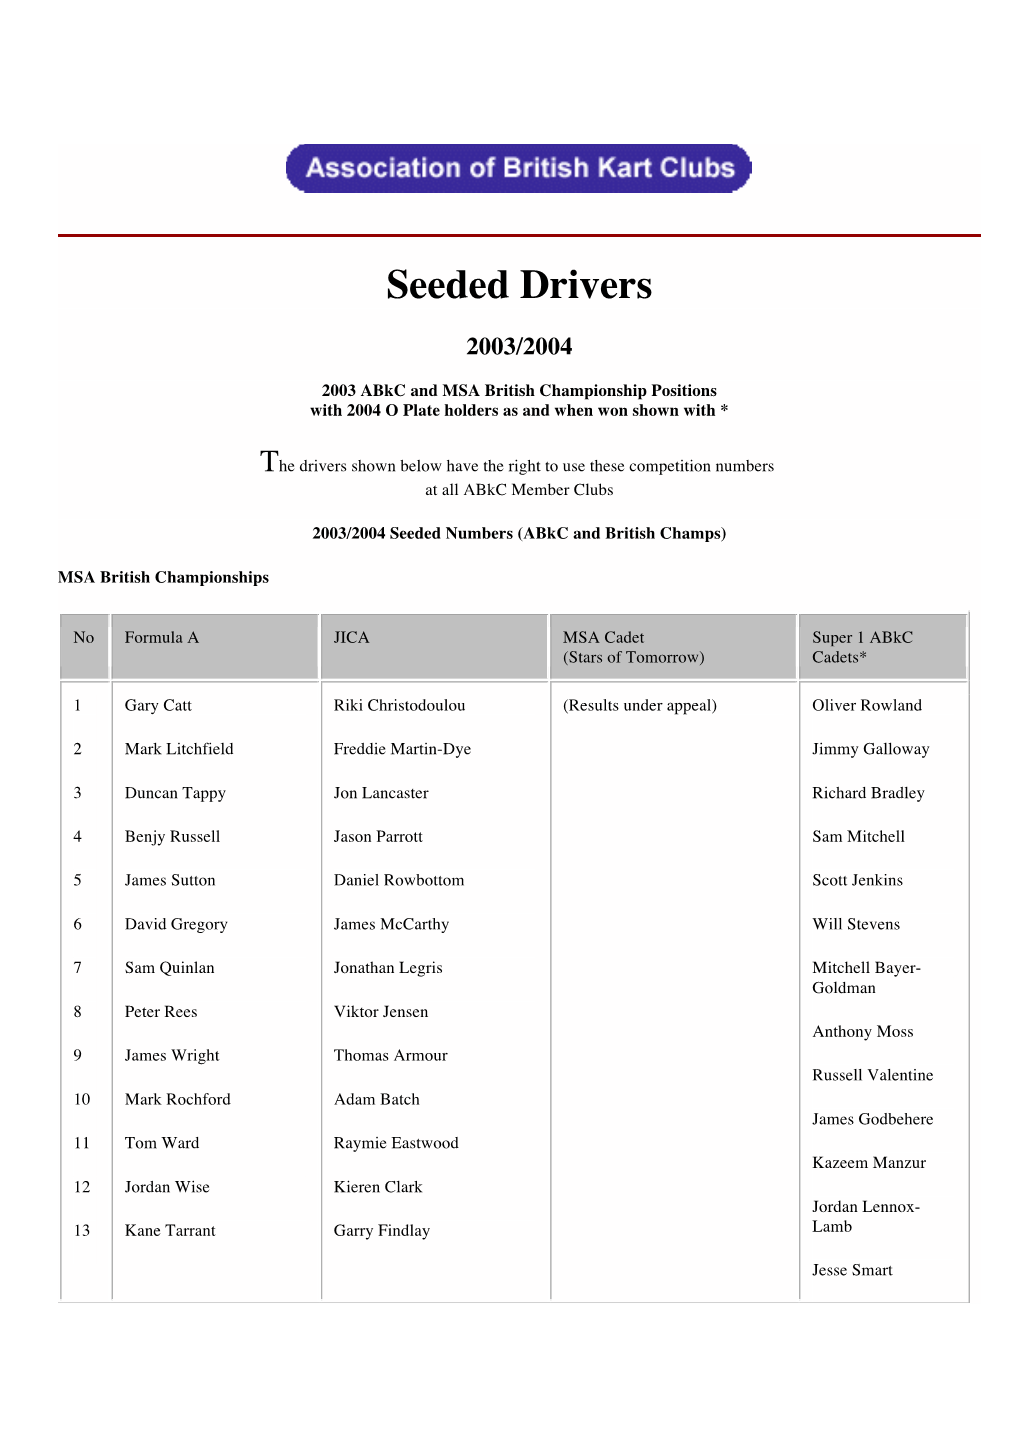 Seeded Drivers